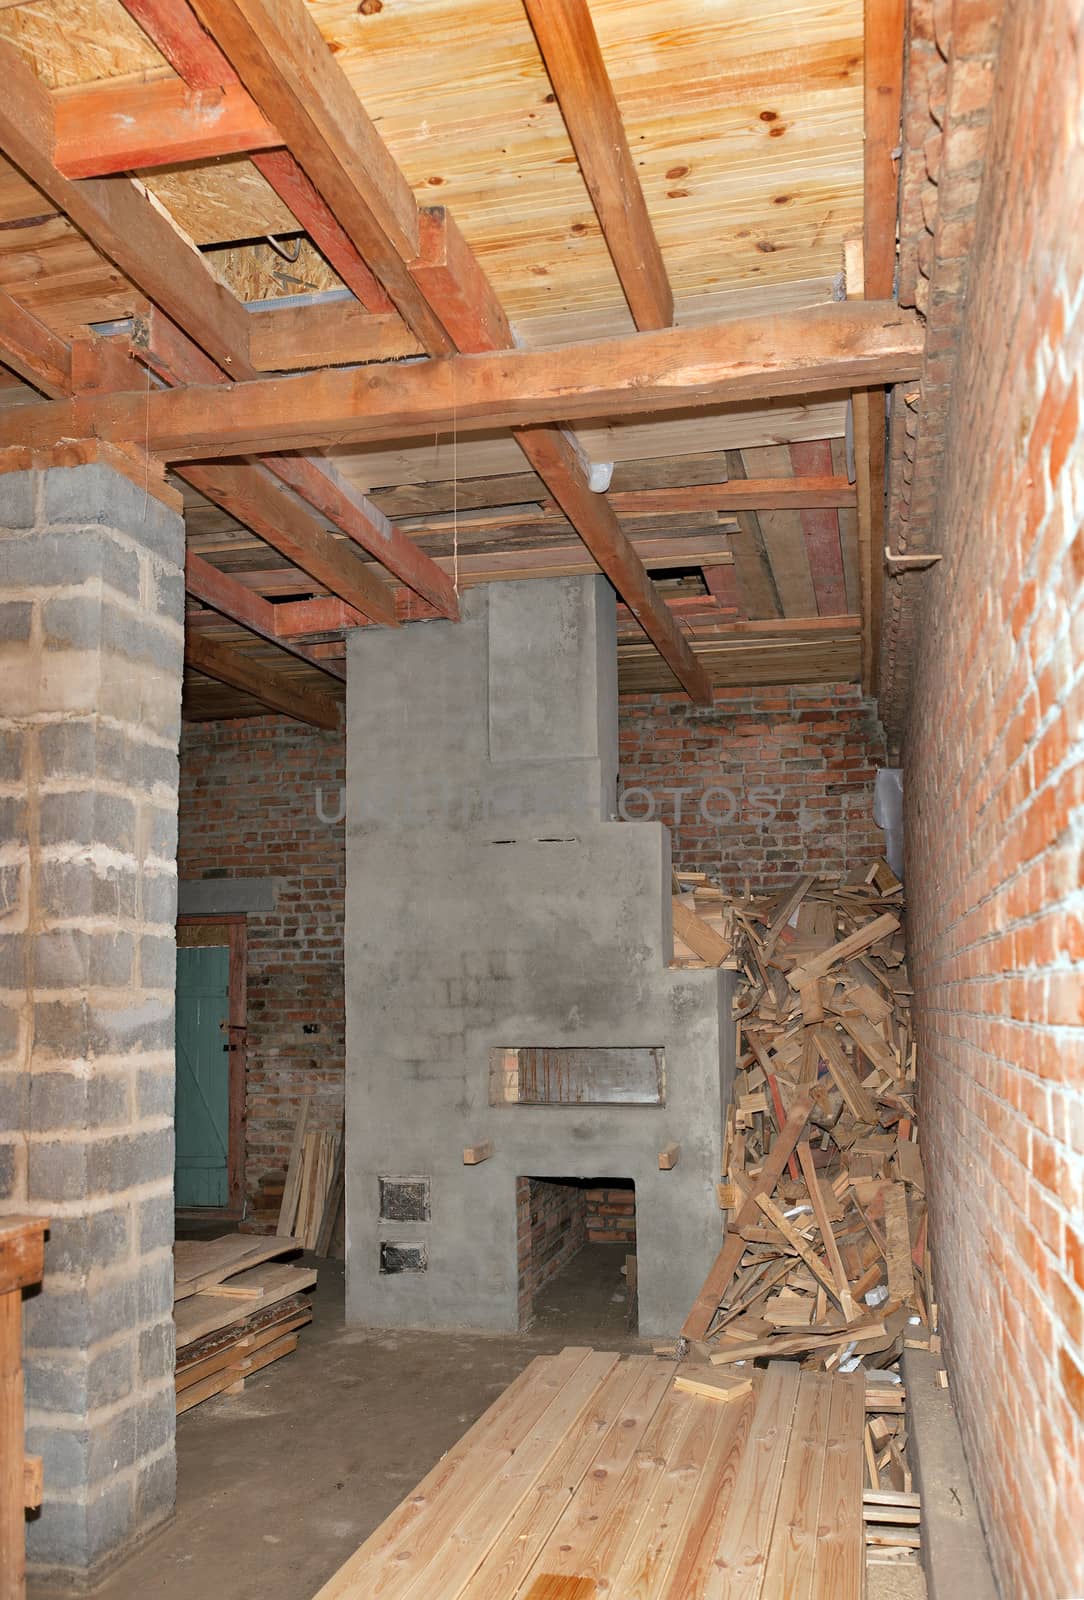 Russian stove in the house under construction by Krakatuk